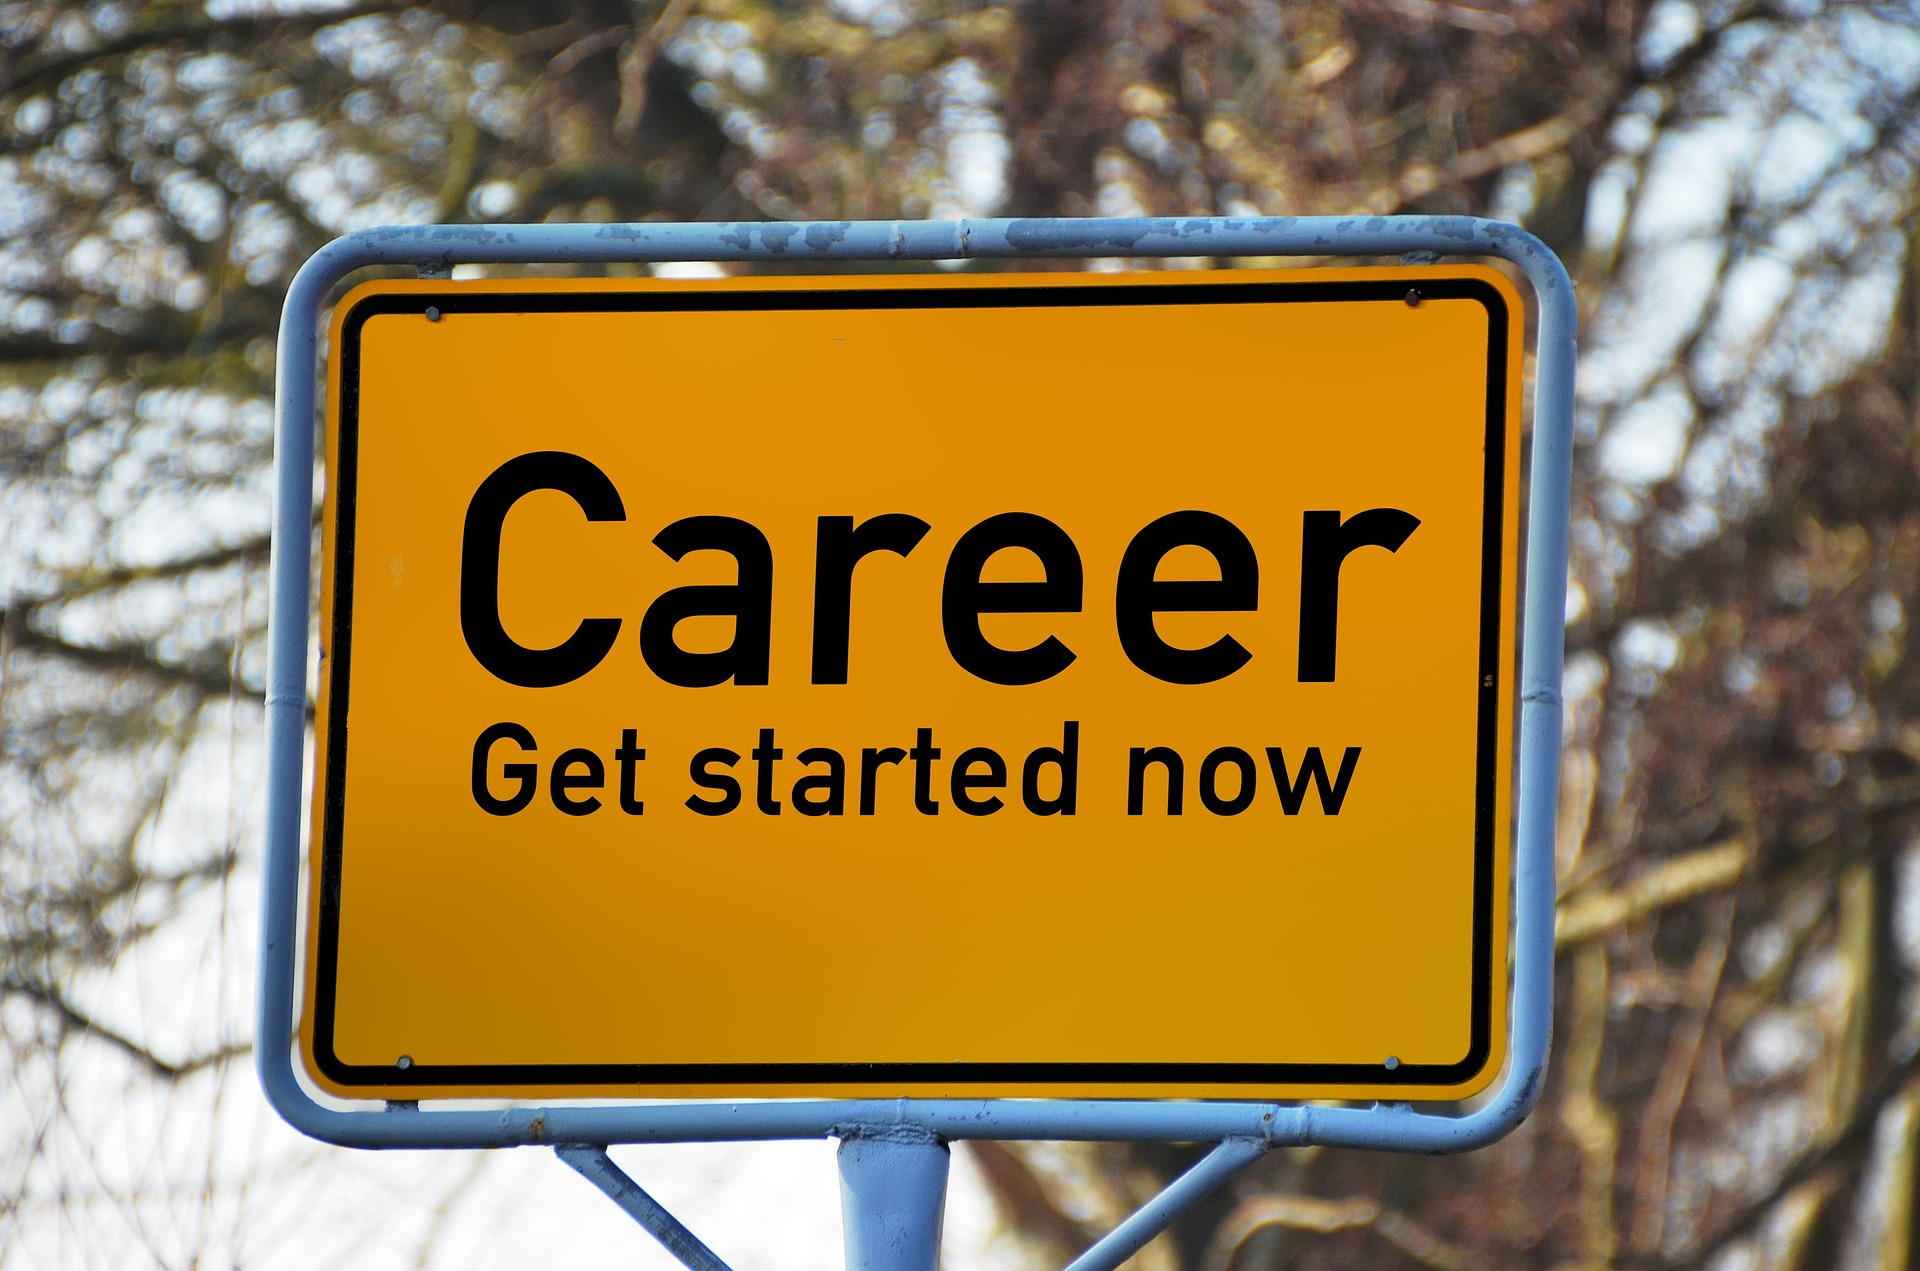 A yellow road sign containing the text "Career Get started now".